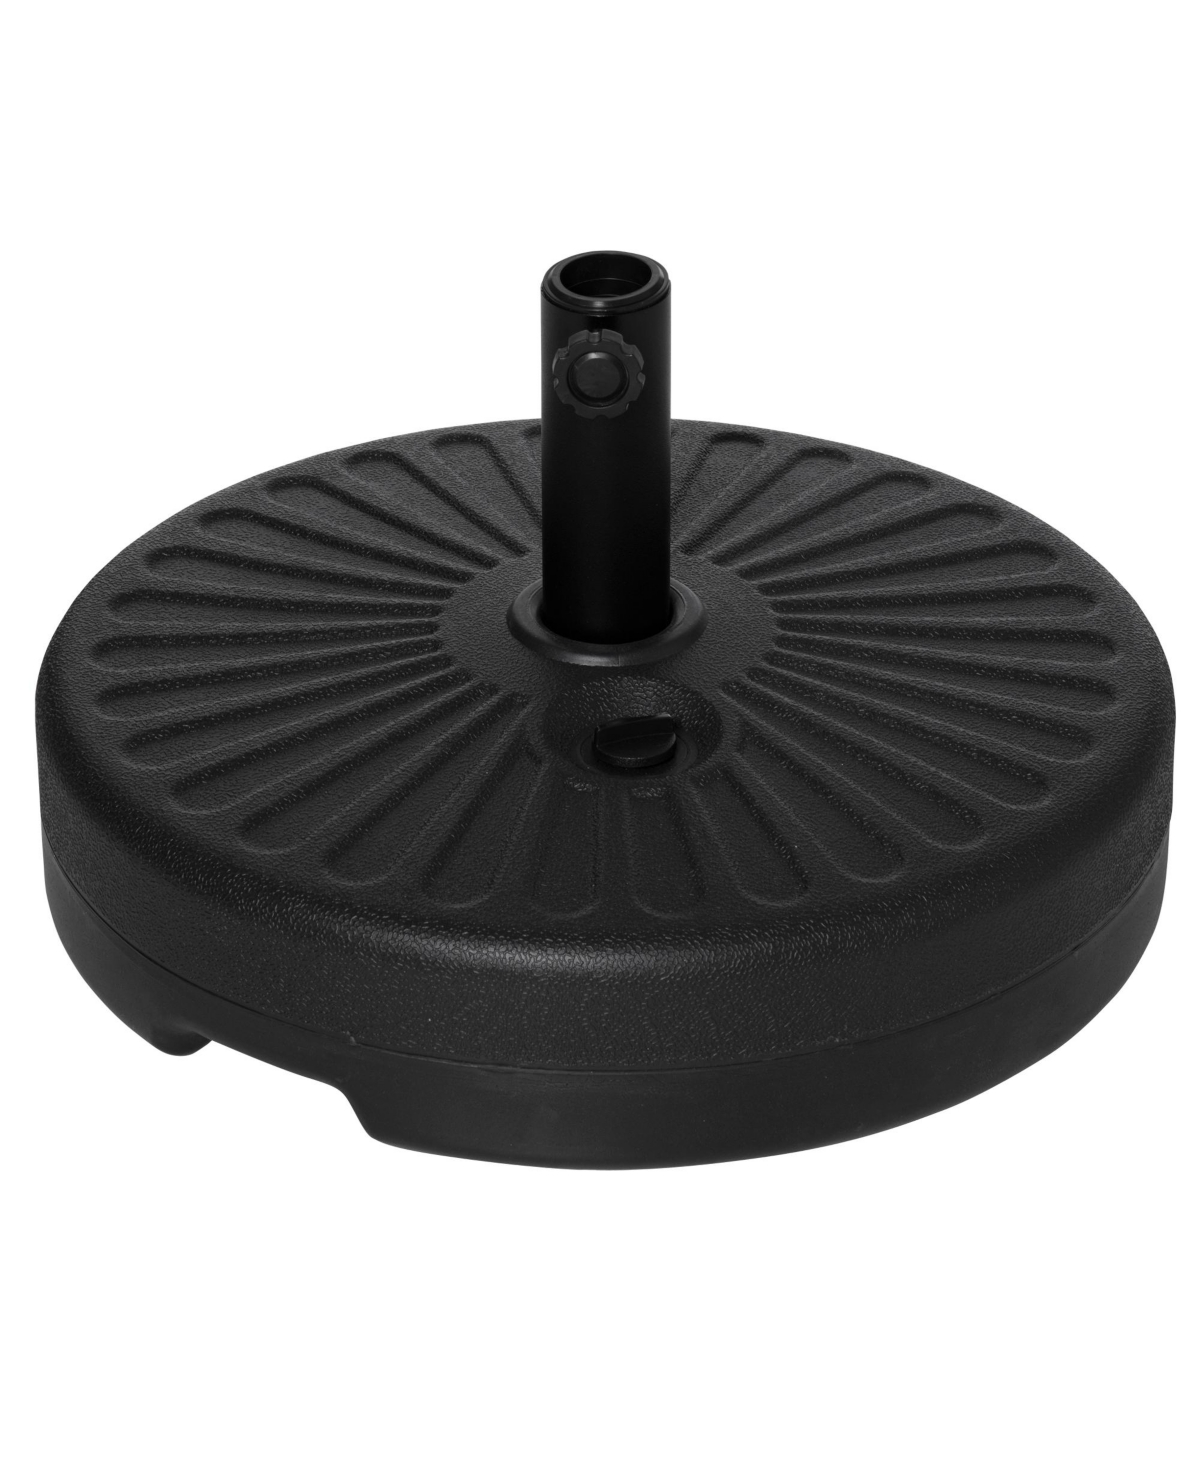 Round Plastic Umbrella Holder, Fillable Patio Umbrella Base Stand for Outdoor, 46lb Water or 57lbs Sand, Black - Black